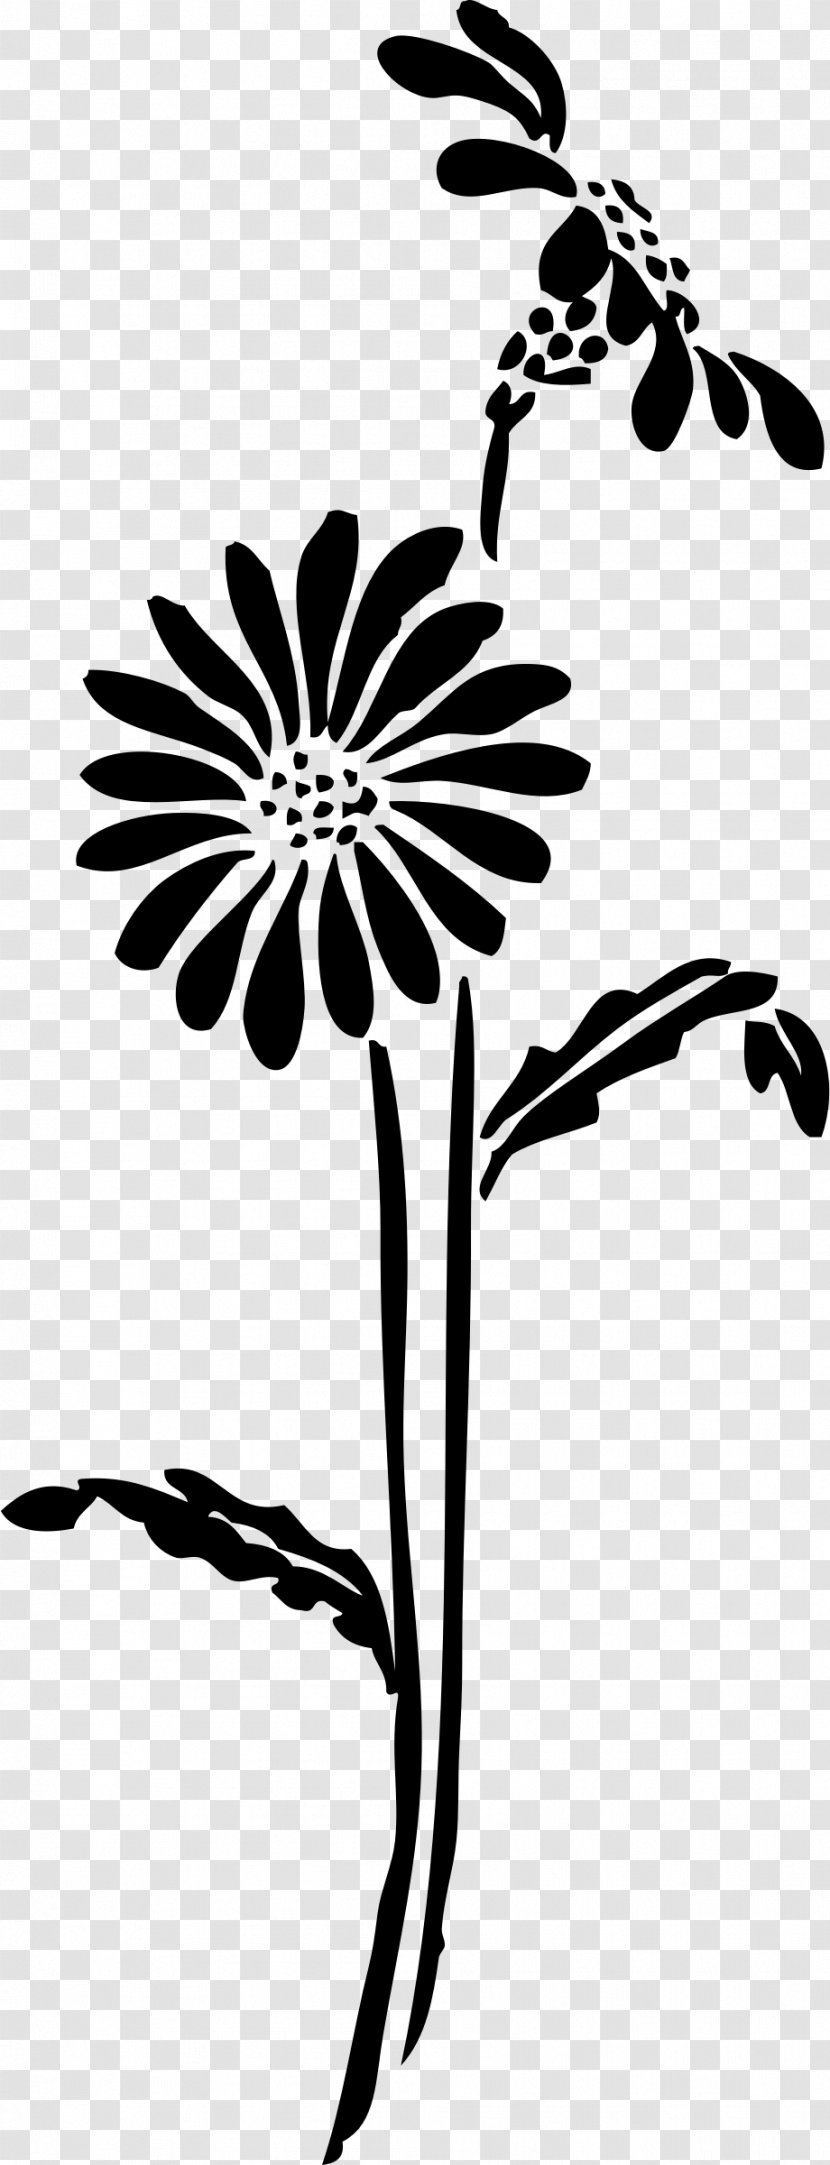 Silhouette Flower Drawing Clip Art Transparent PNG